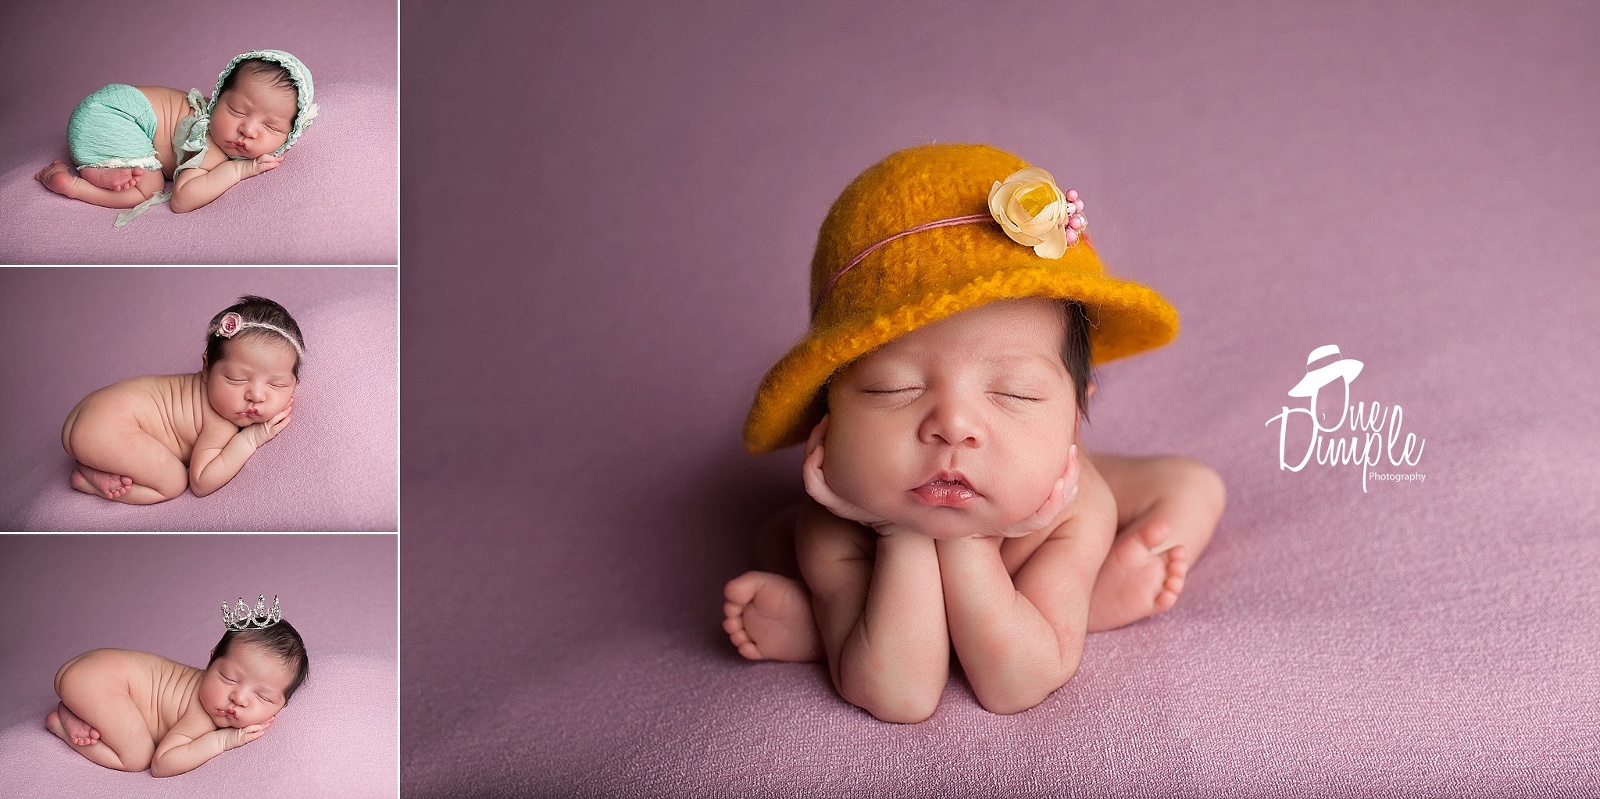 Newborn baby with yellow felted hat